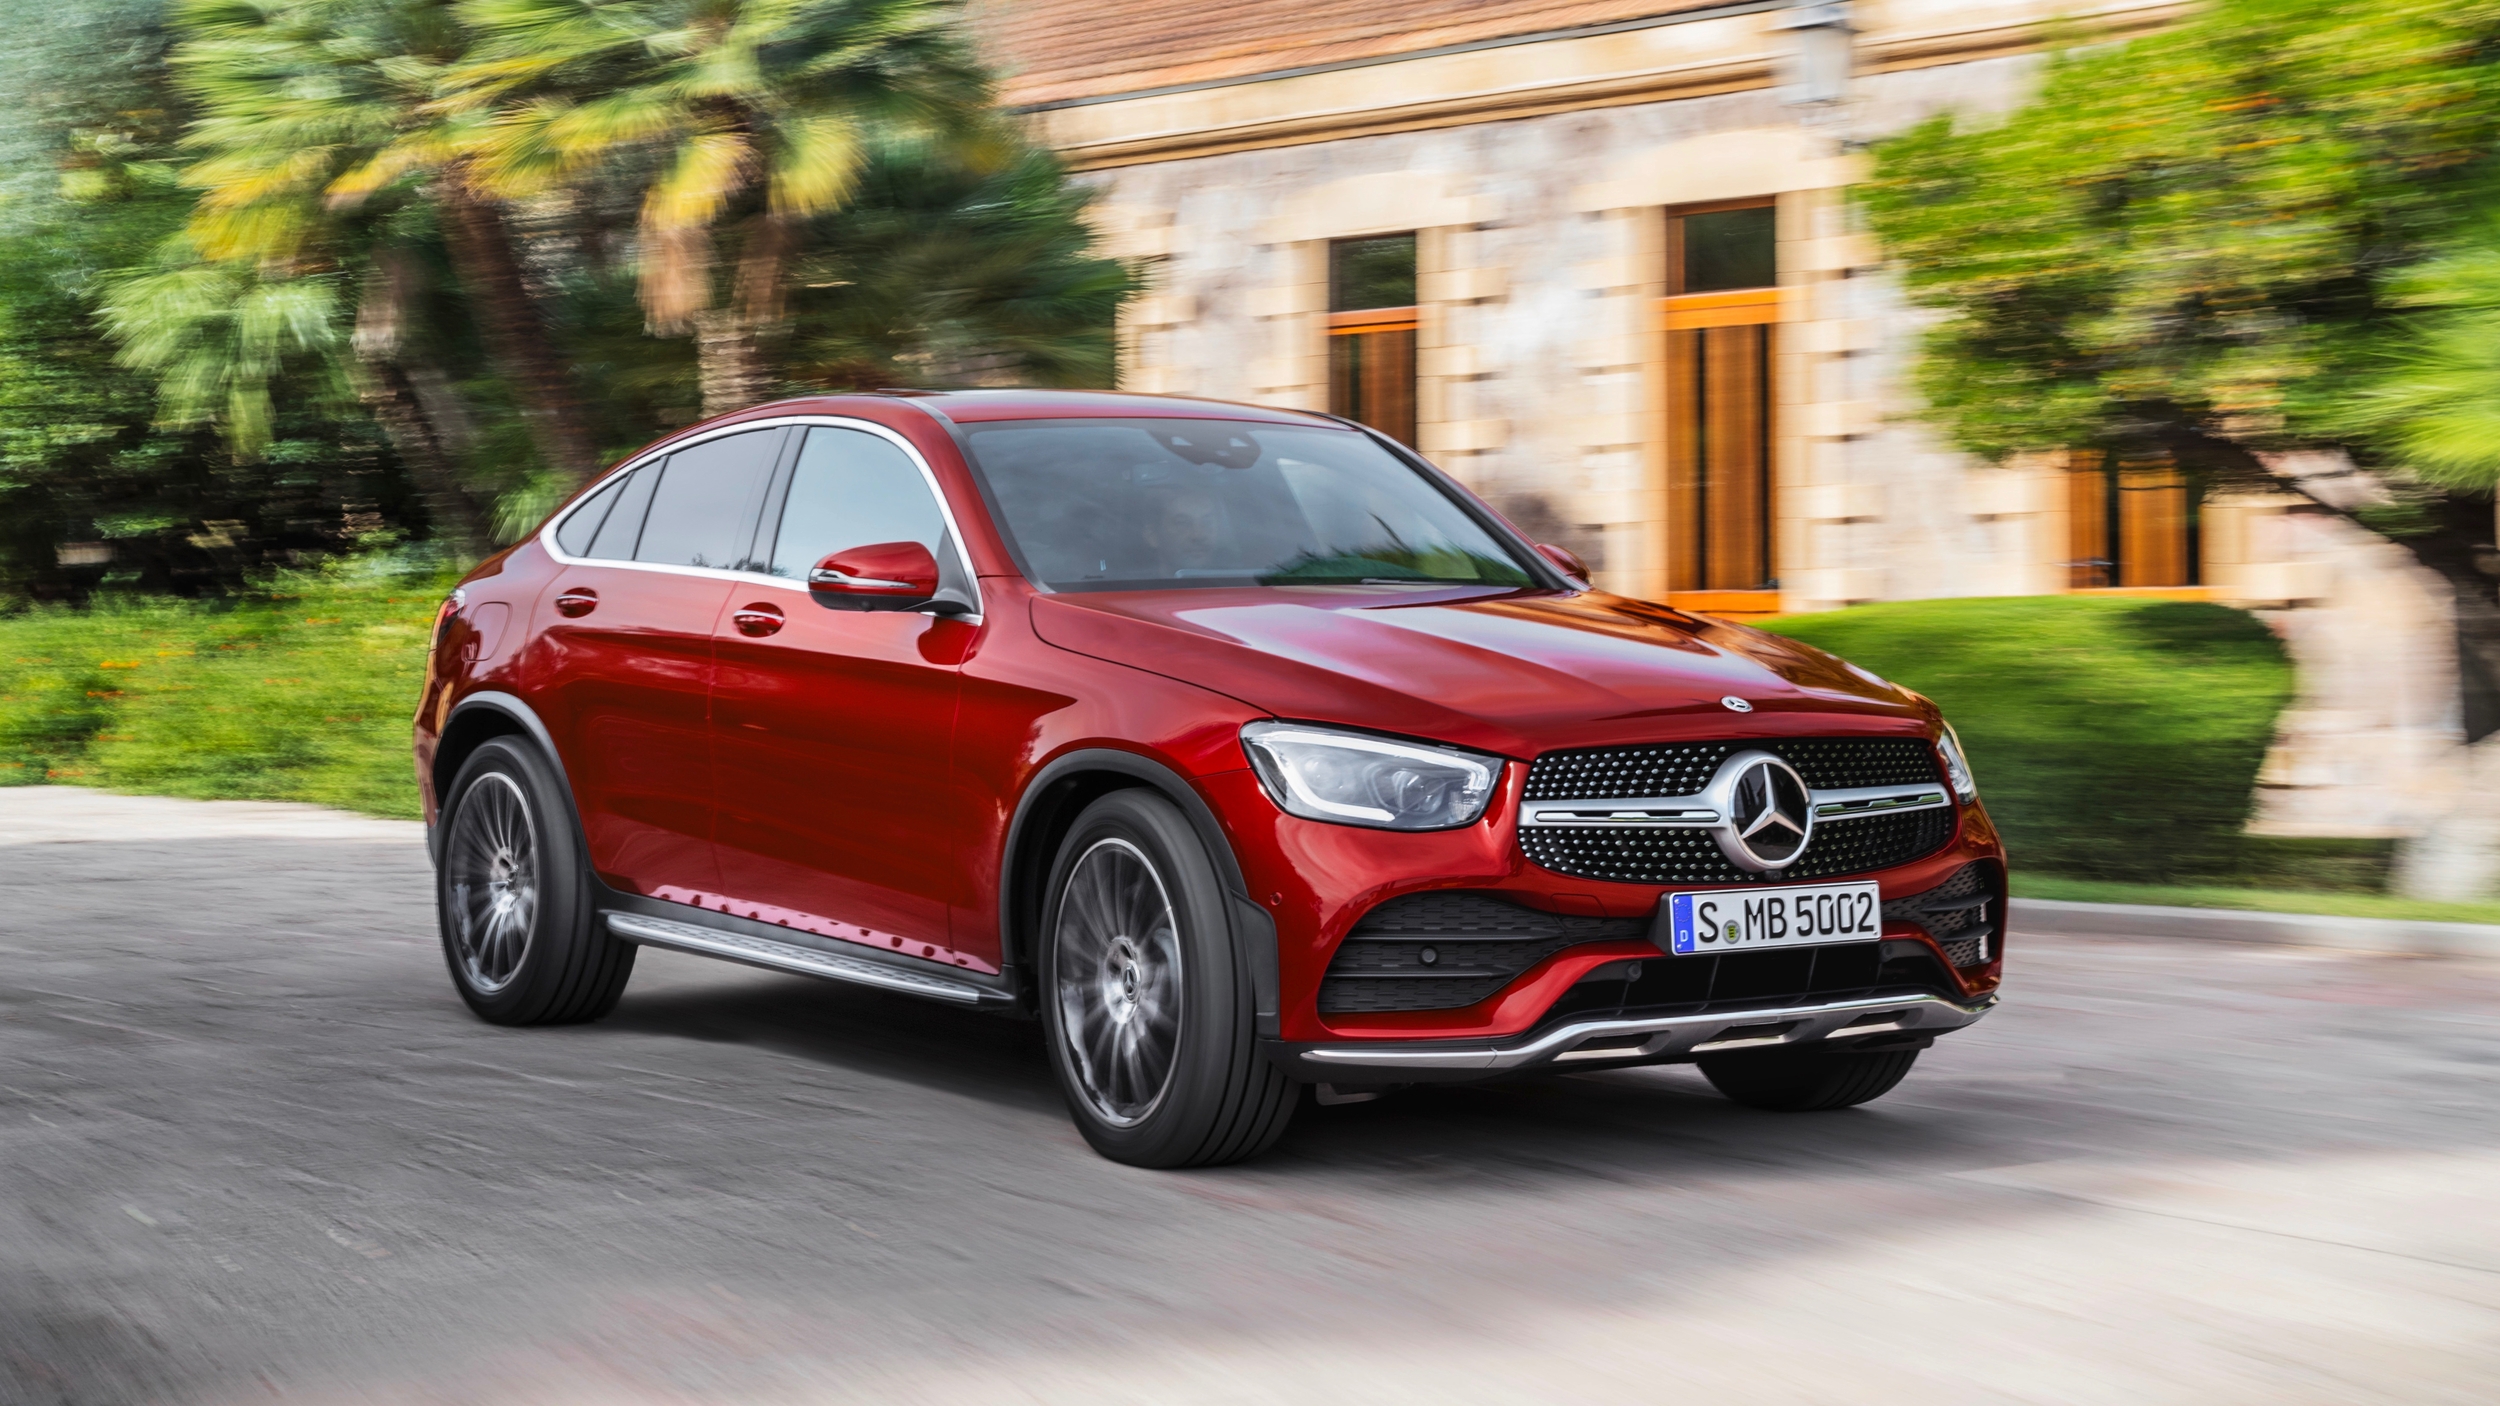 2020 Mercedes-Benz GLC-Class Coupe Photo Gallery